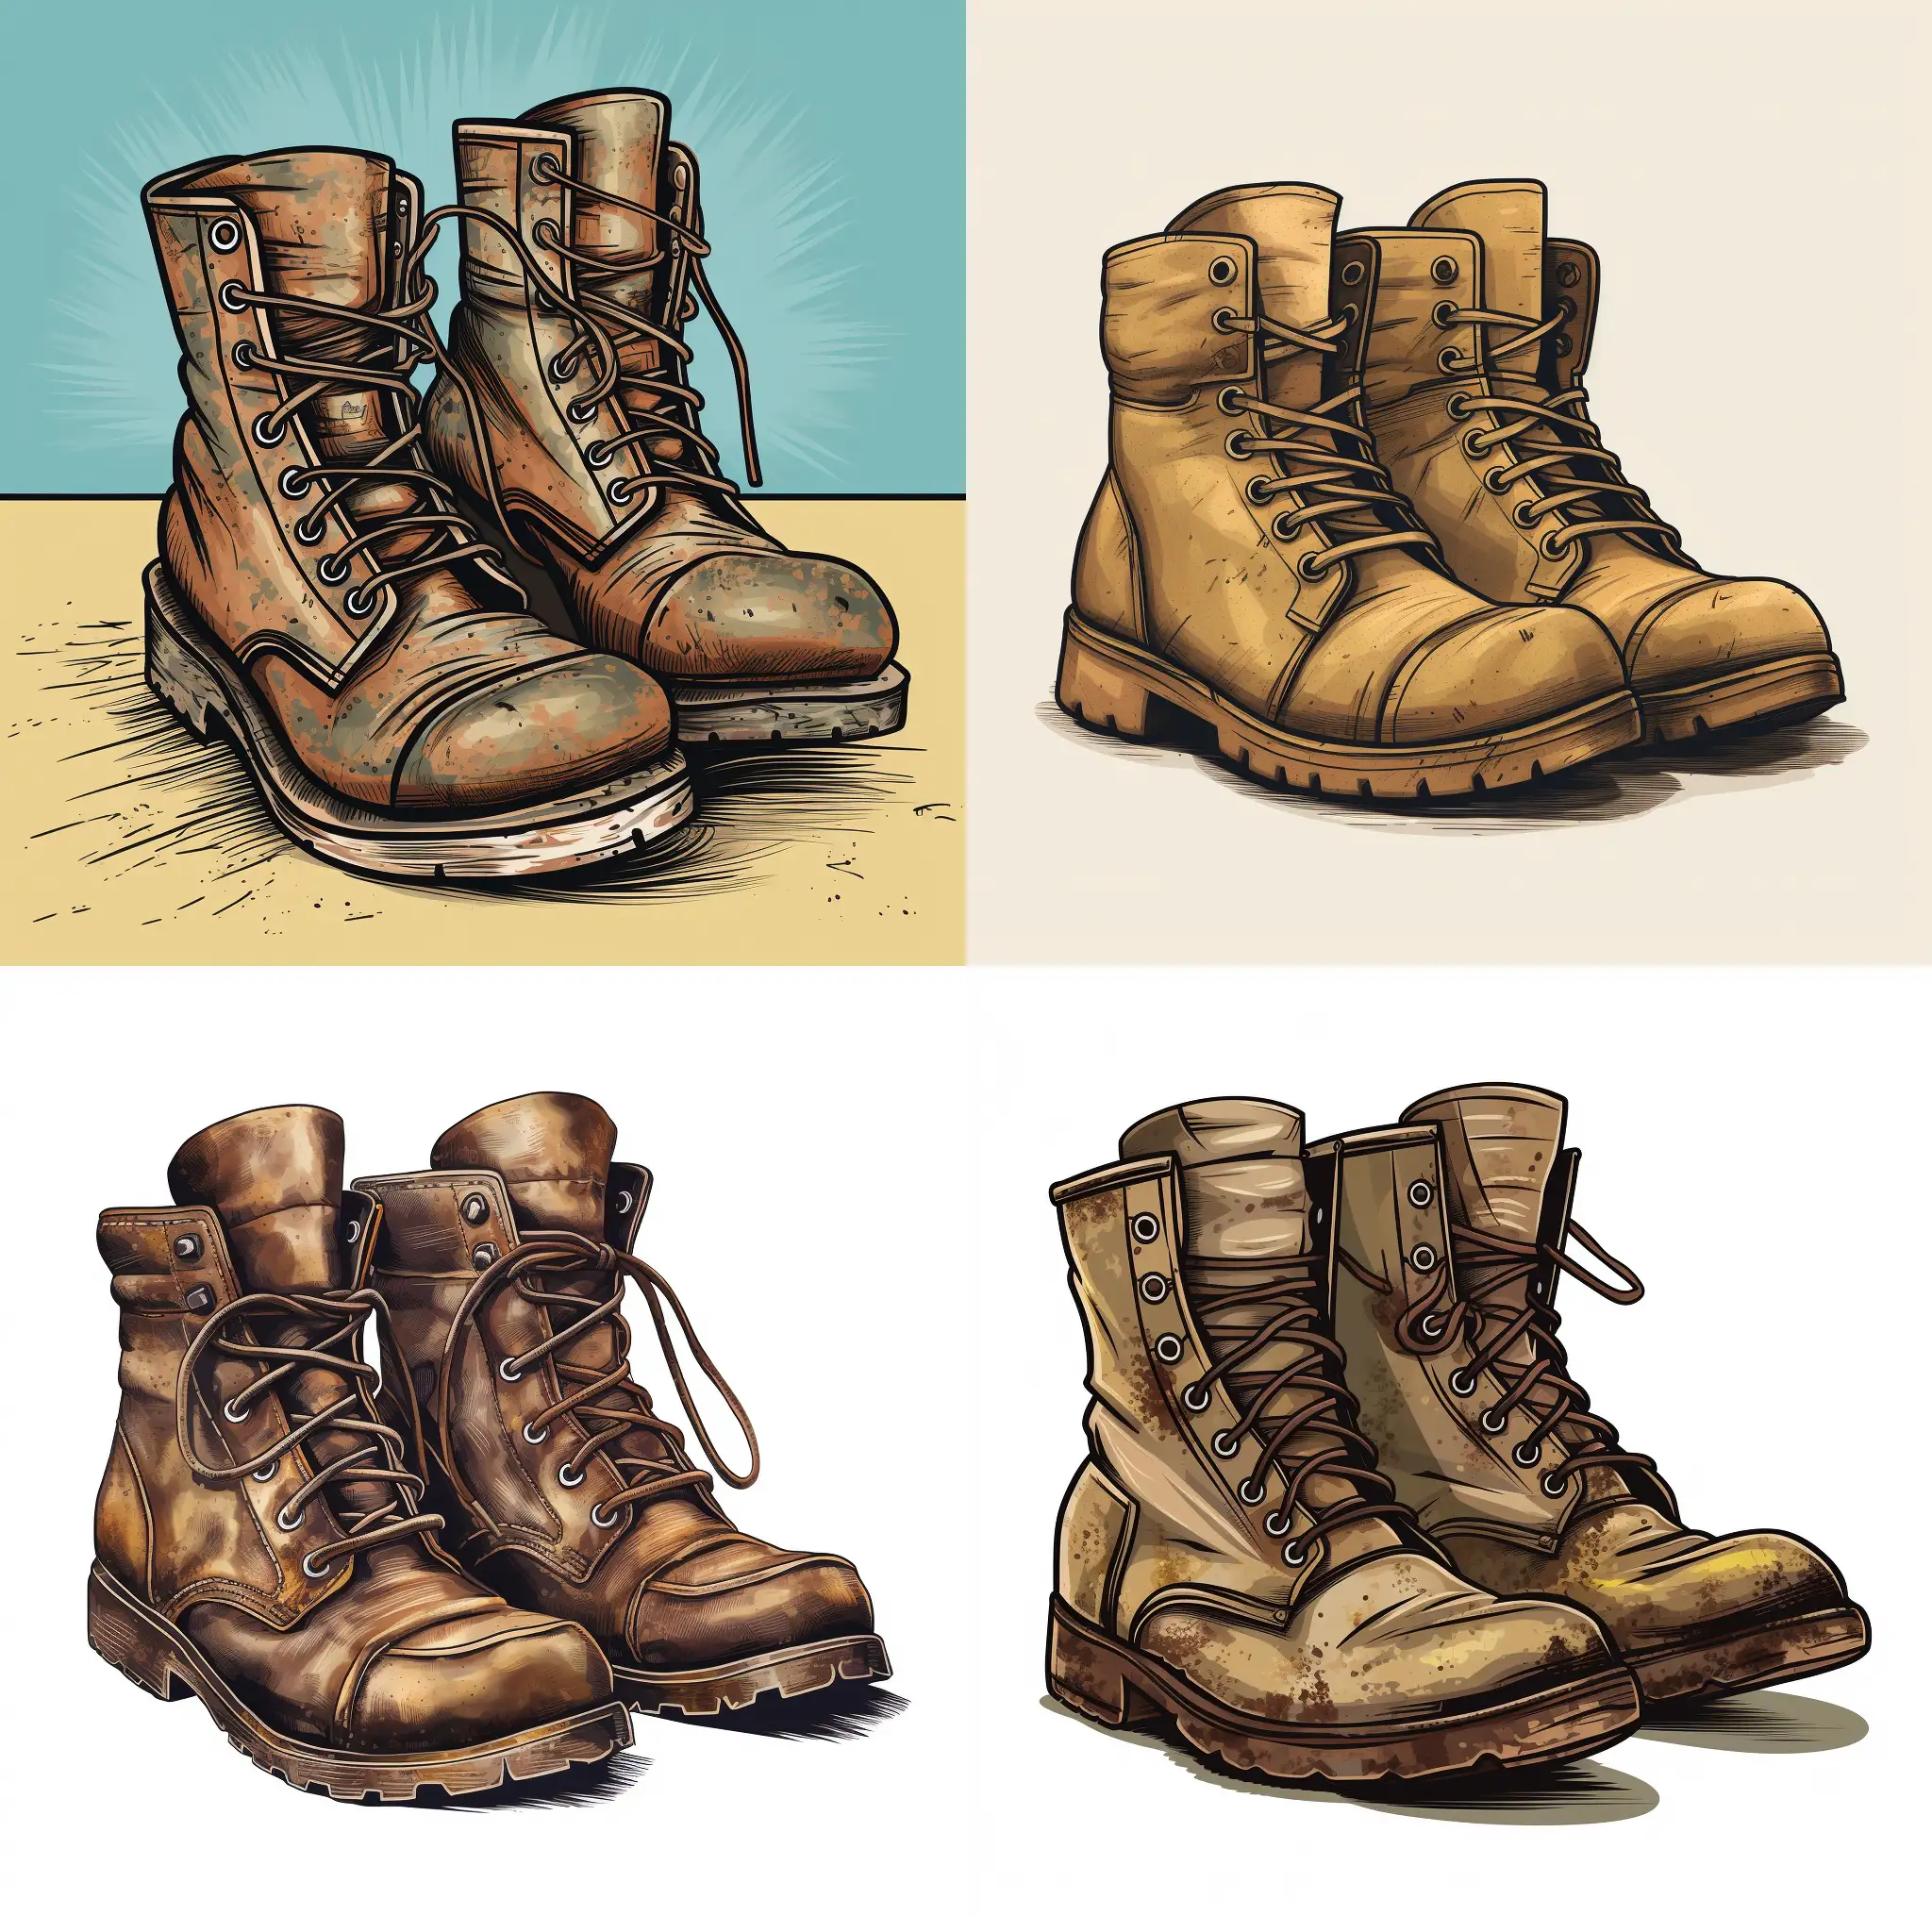 Old worn boots in rustic vector style